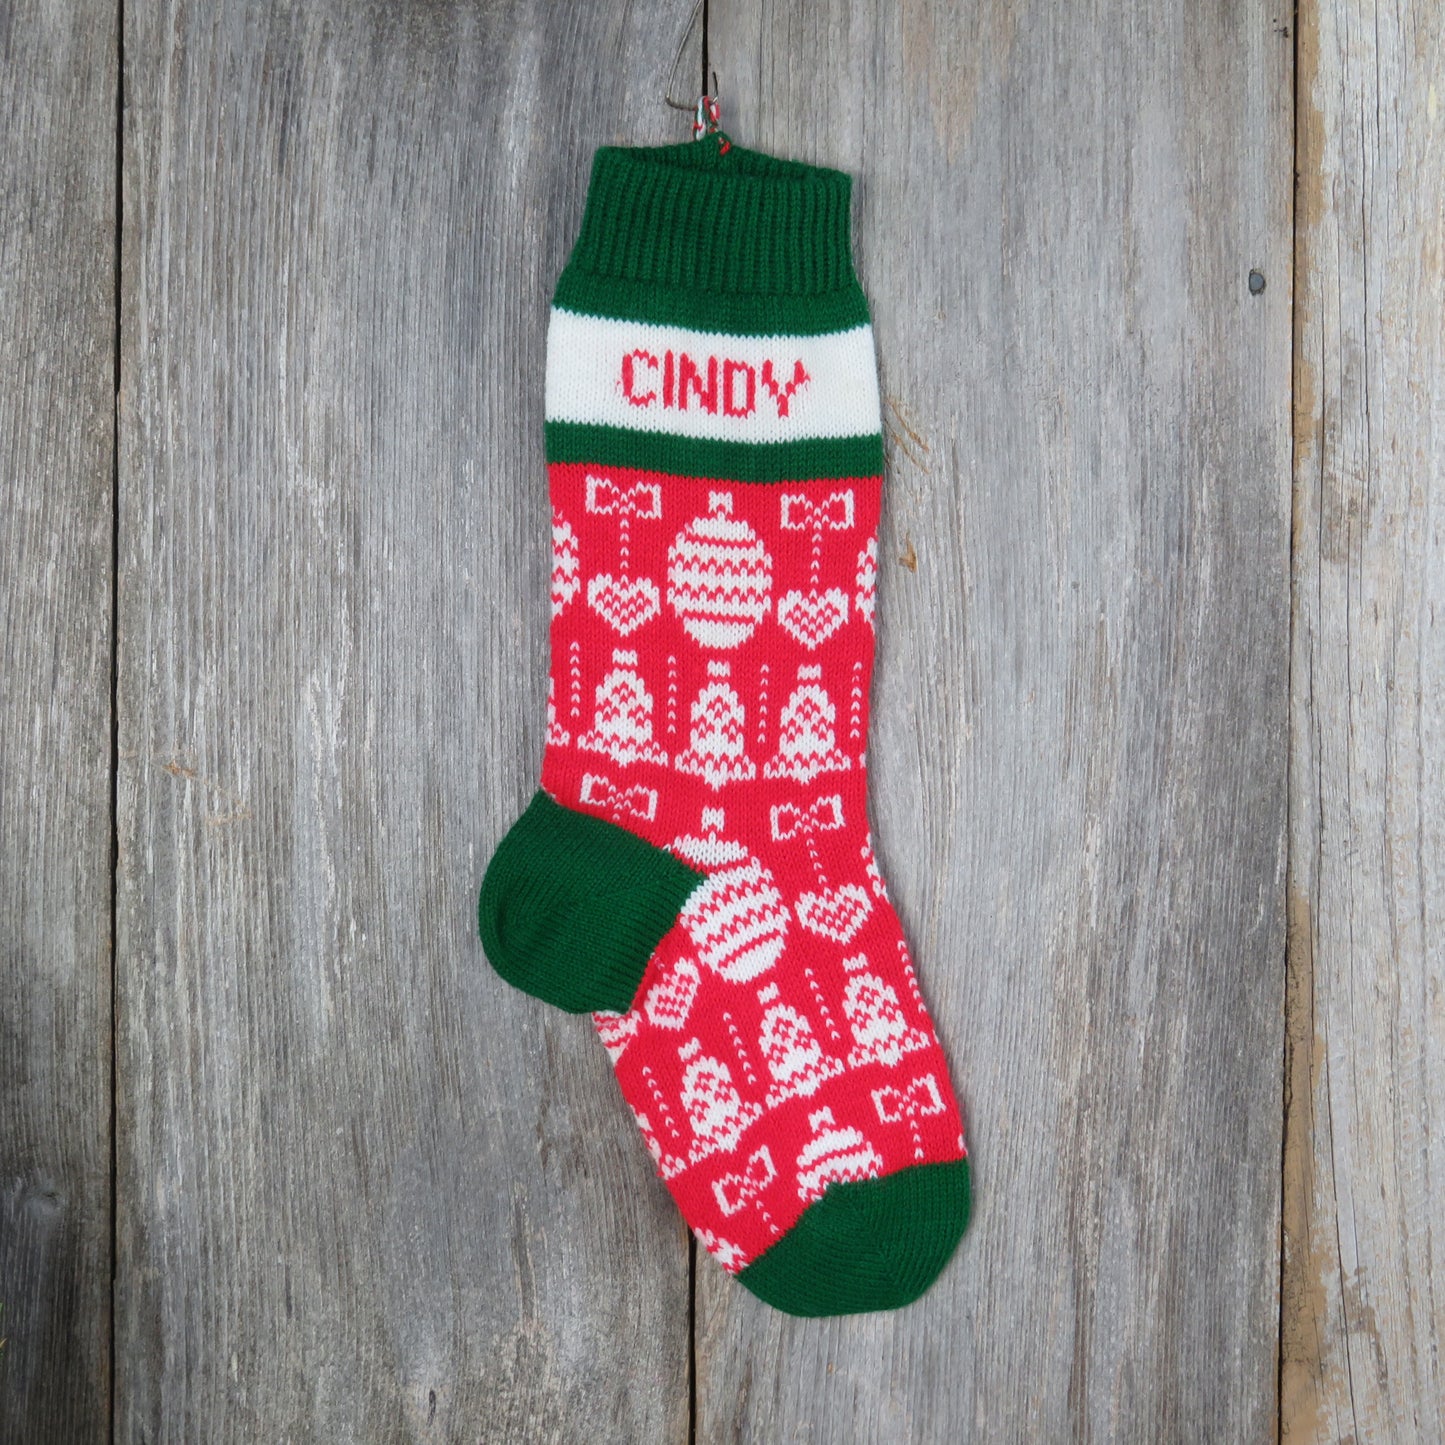 Vintage Knit Stocking Cindy Name Red White Green Knitted Christmas Ornament Pattern Sock